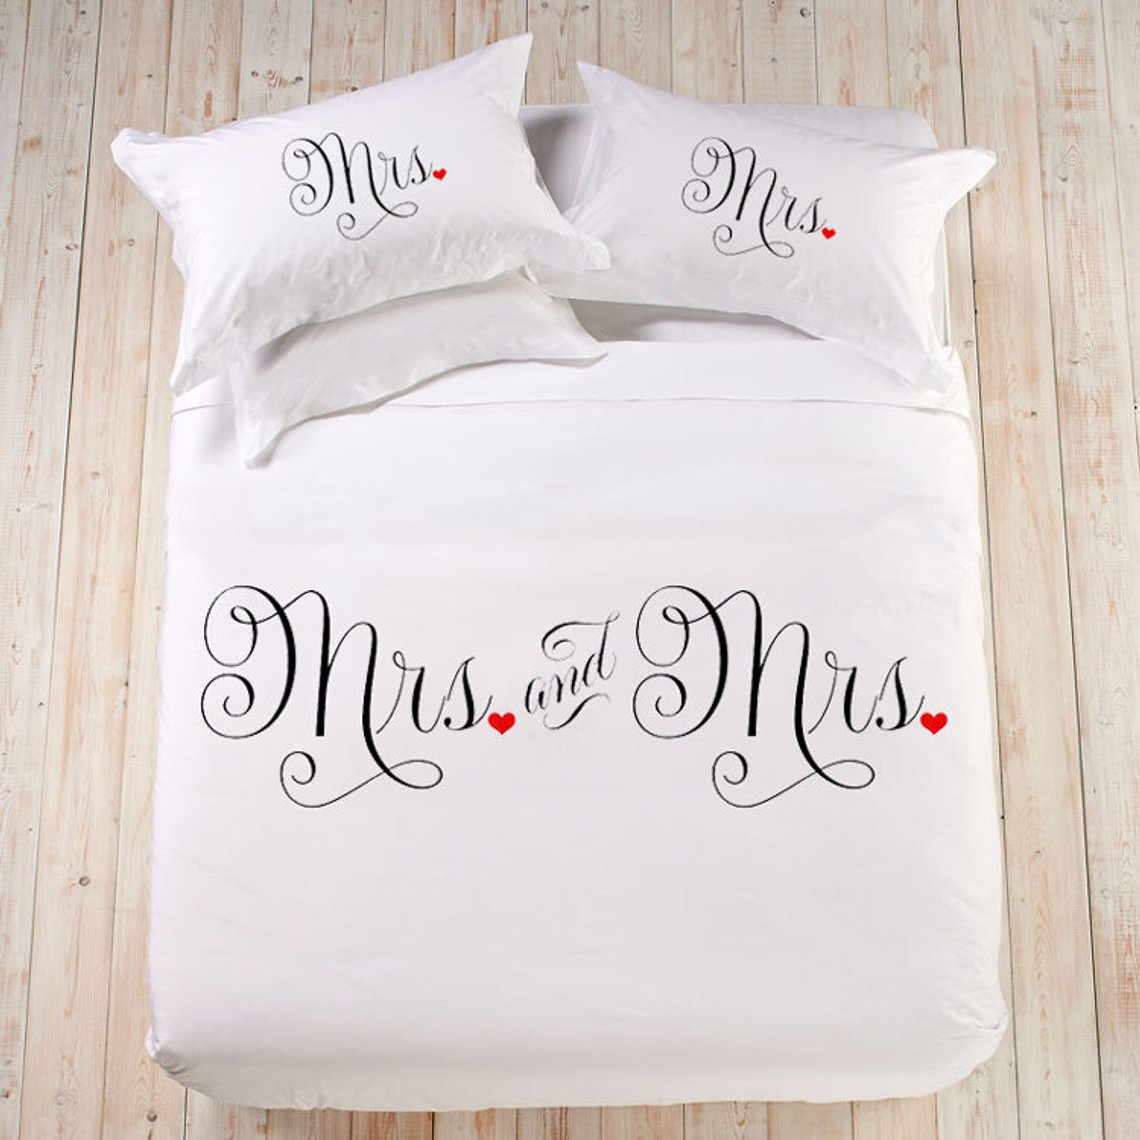 Mrs and Mrs Gift Lesbian Wedding Gift Idea Mrs and Mrs Pillowcases.